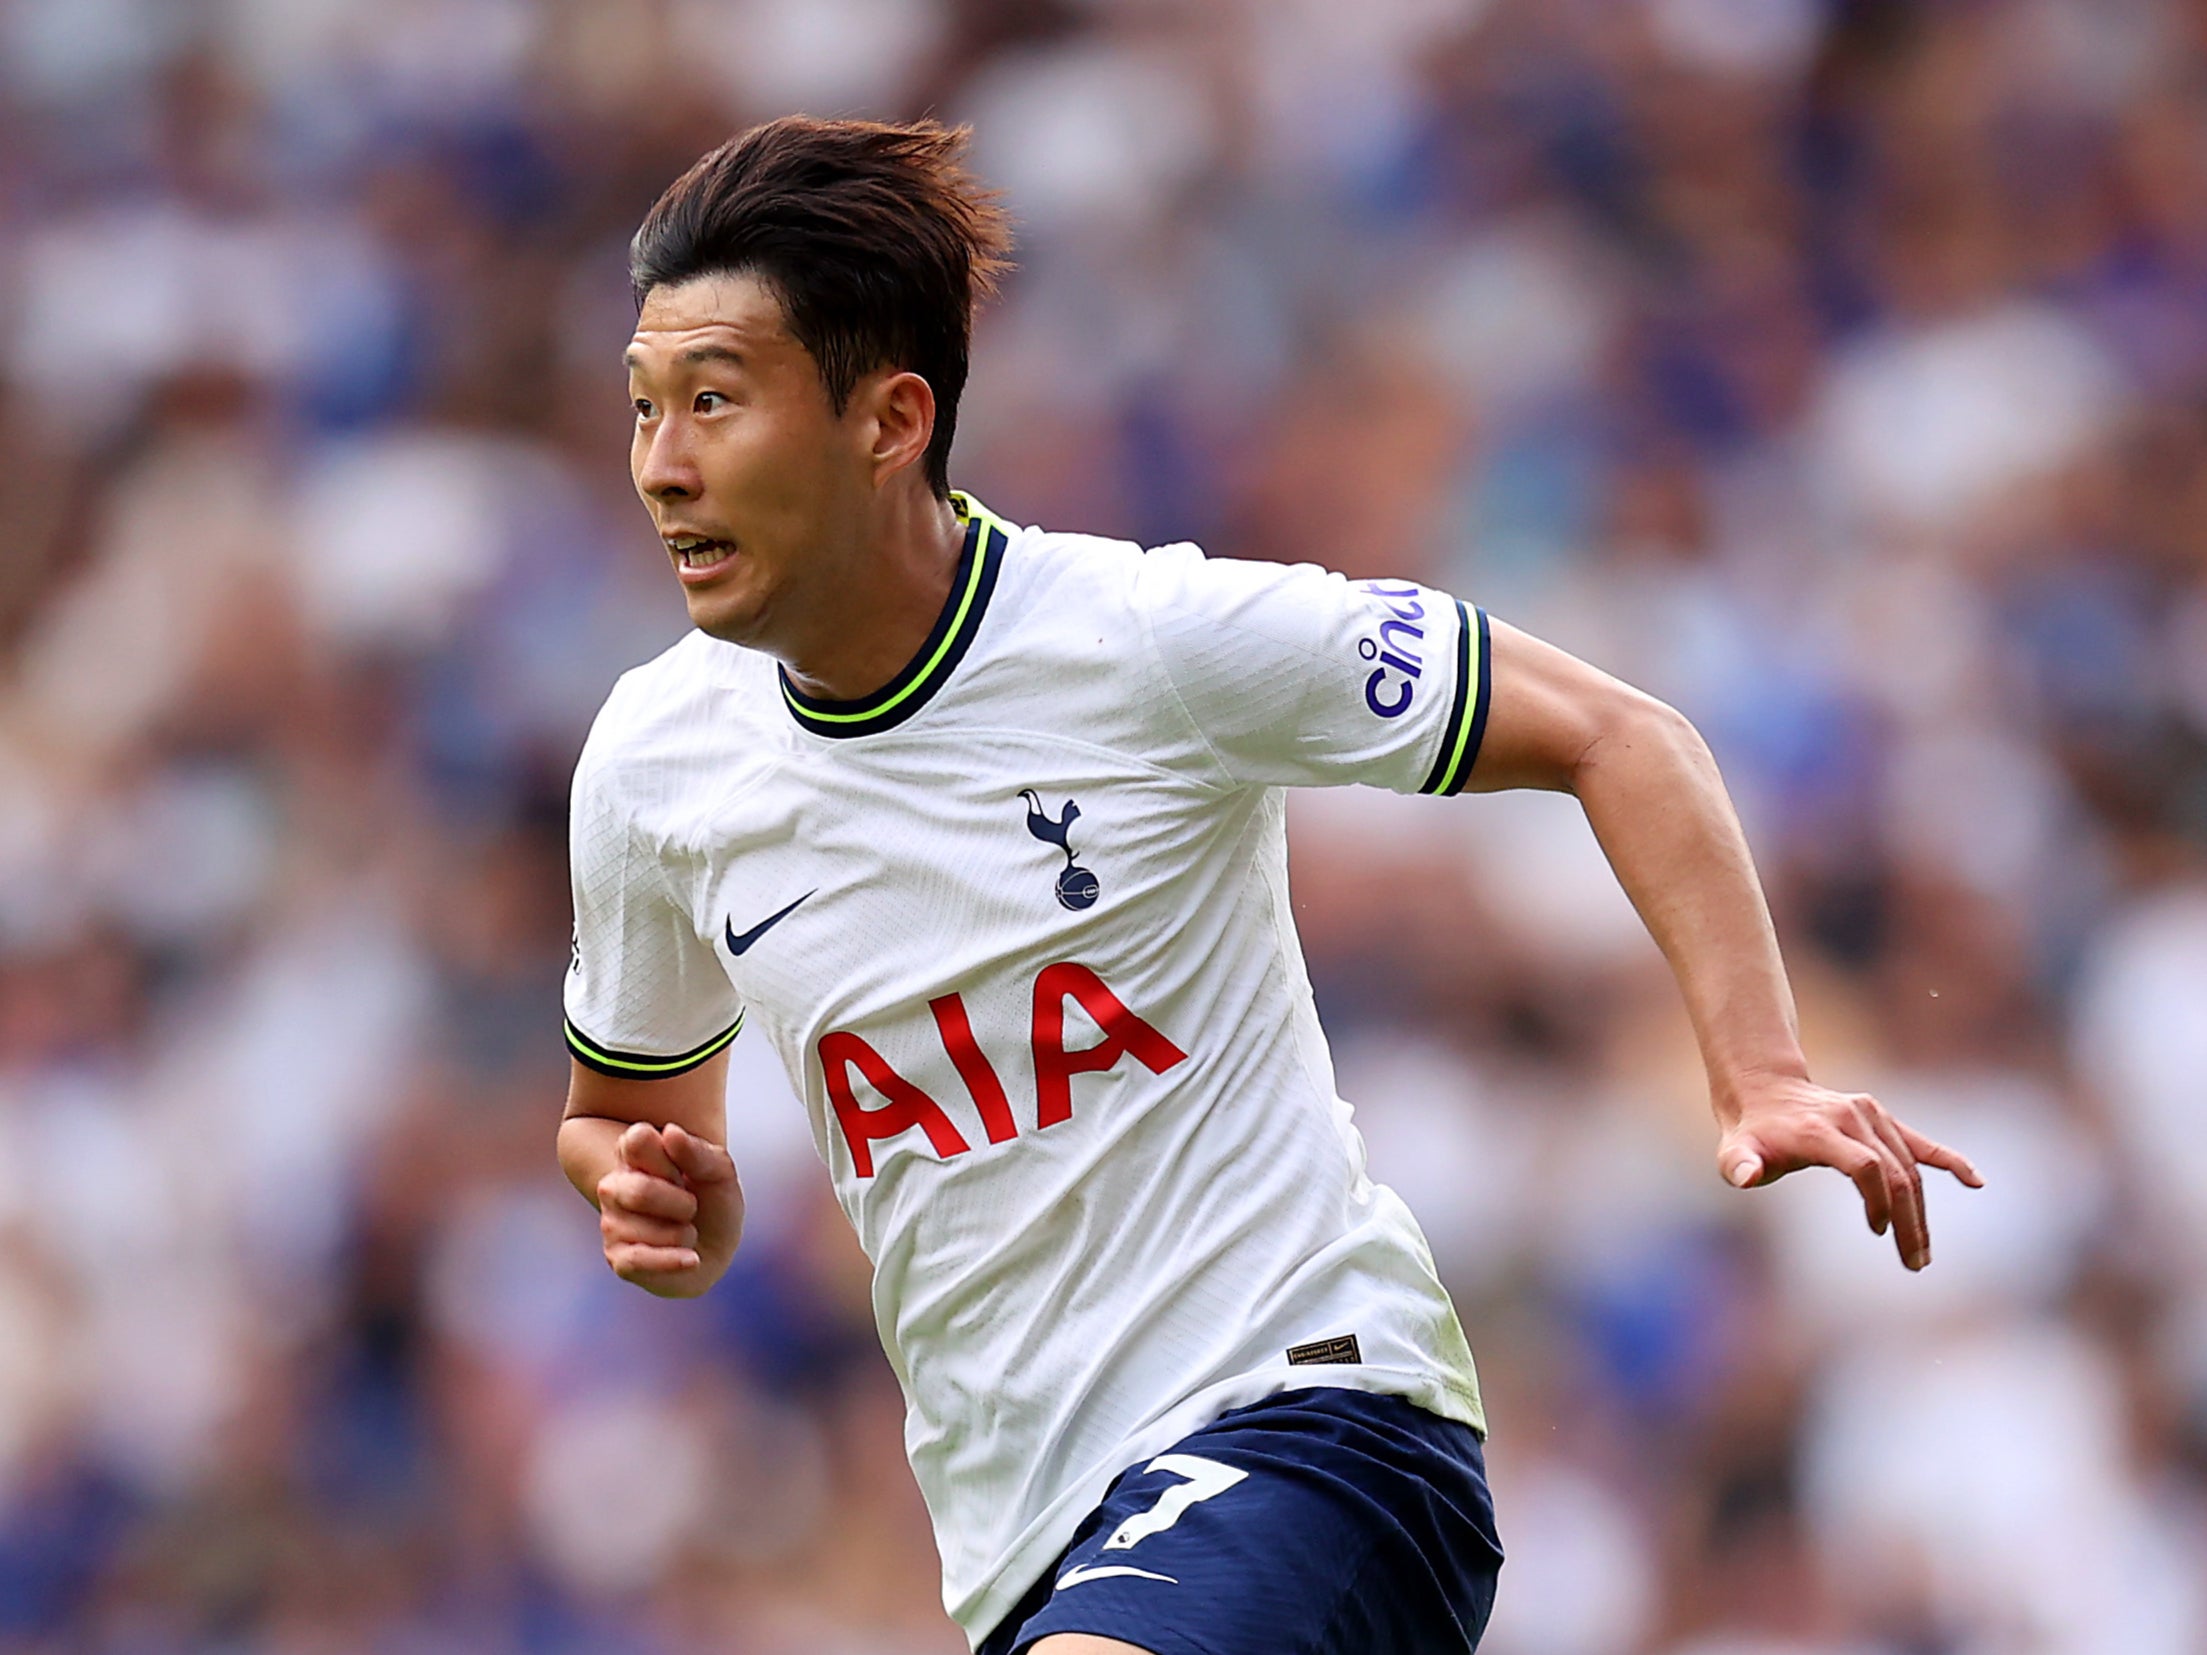 Son Heung-min was allegedly the subject of racist abuse by a Chelsea season ticket holder